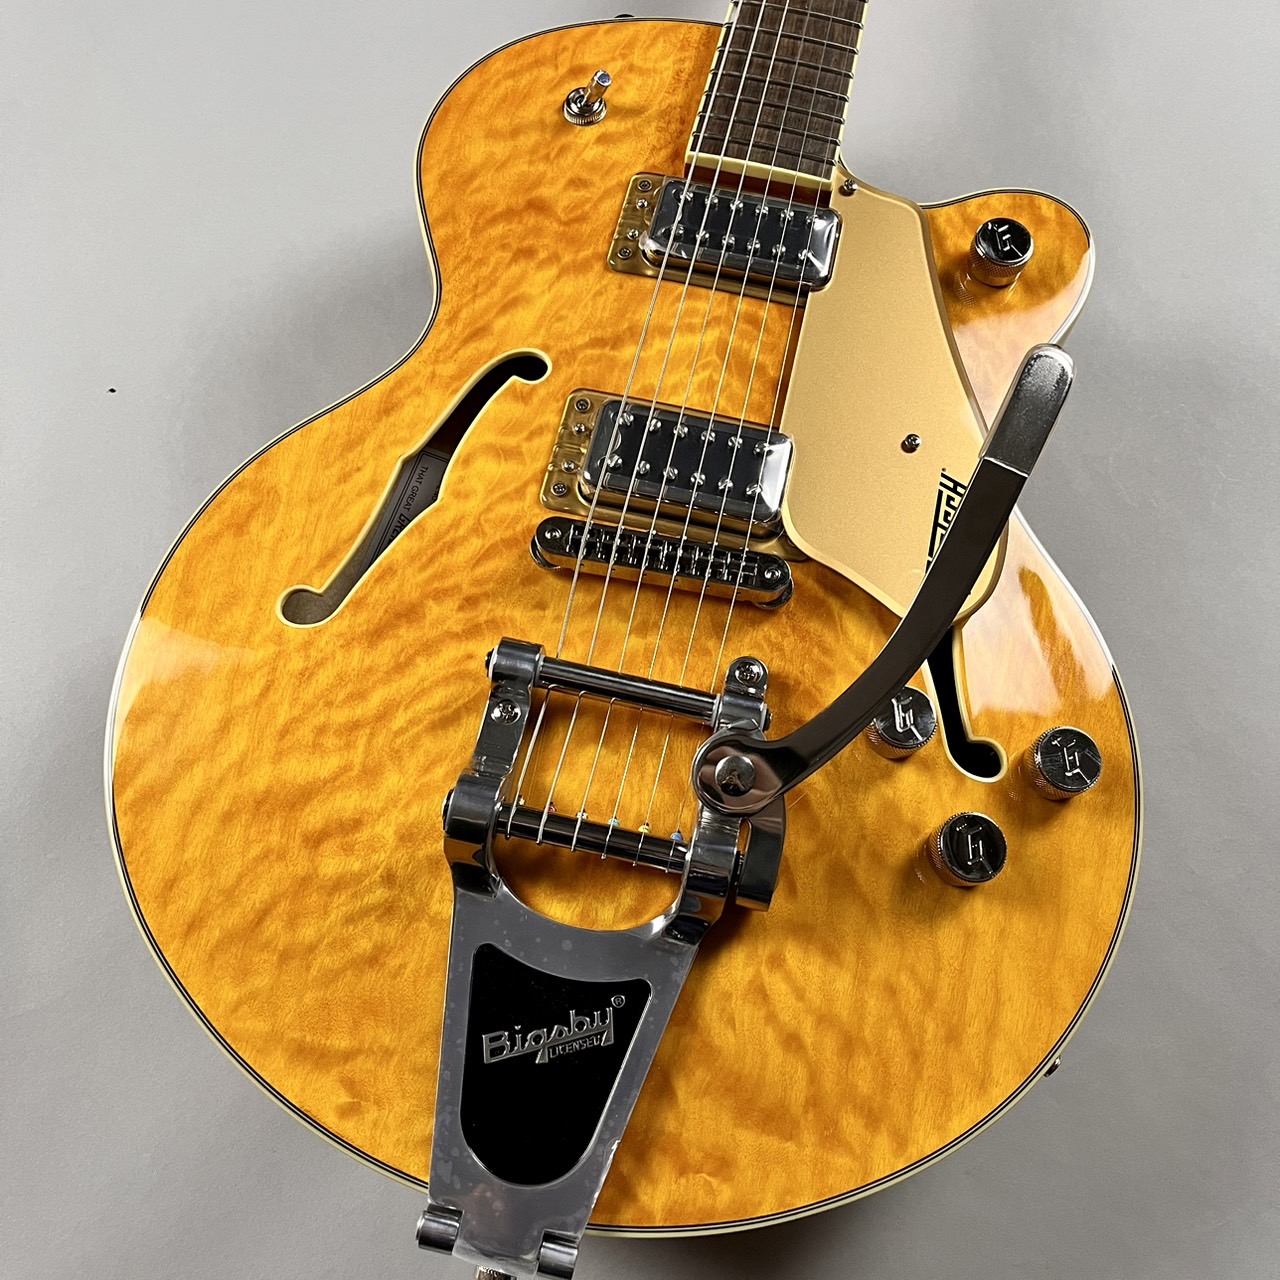 G5655T-QM　Speyside　Center　Maple　Bigsby　with　【横浜店】-　Single-Cut　Electromatic　Jr.　Block　Gretsch　Quilted